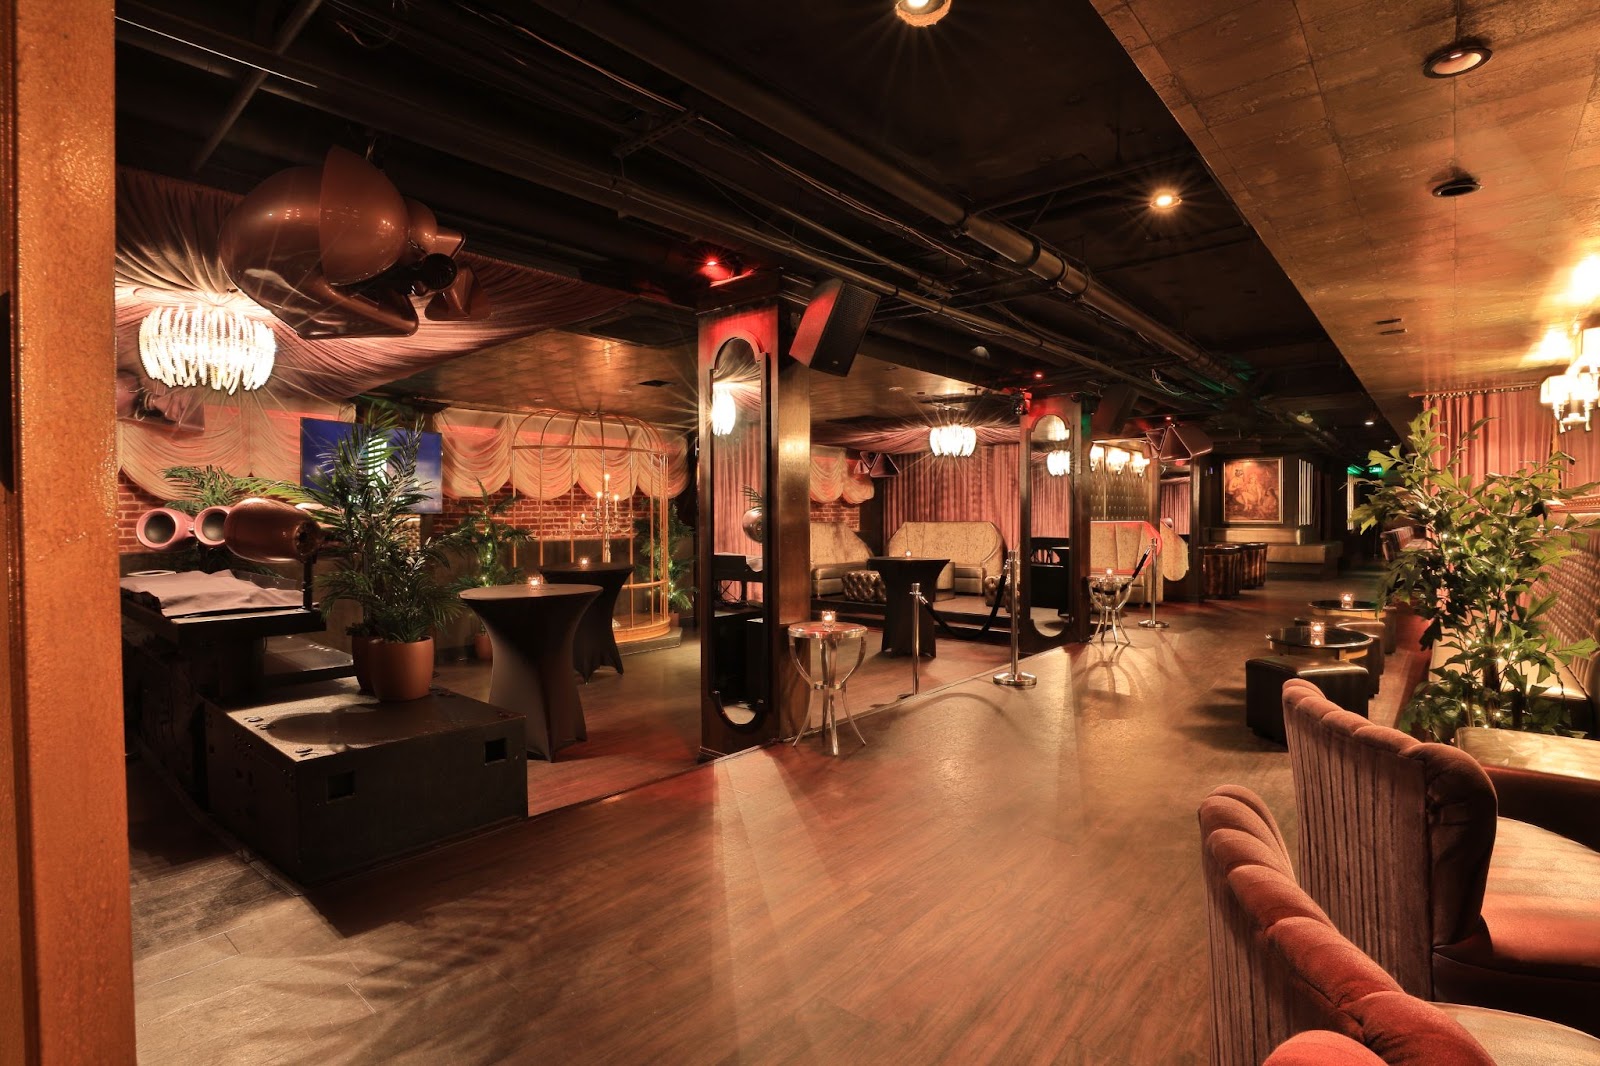 Hawthorn Lounge & Event Space